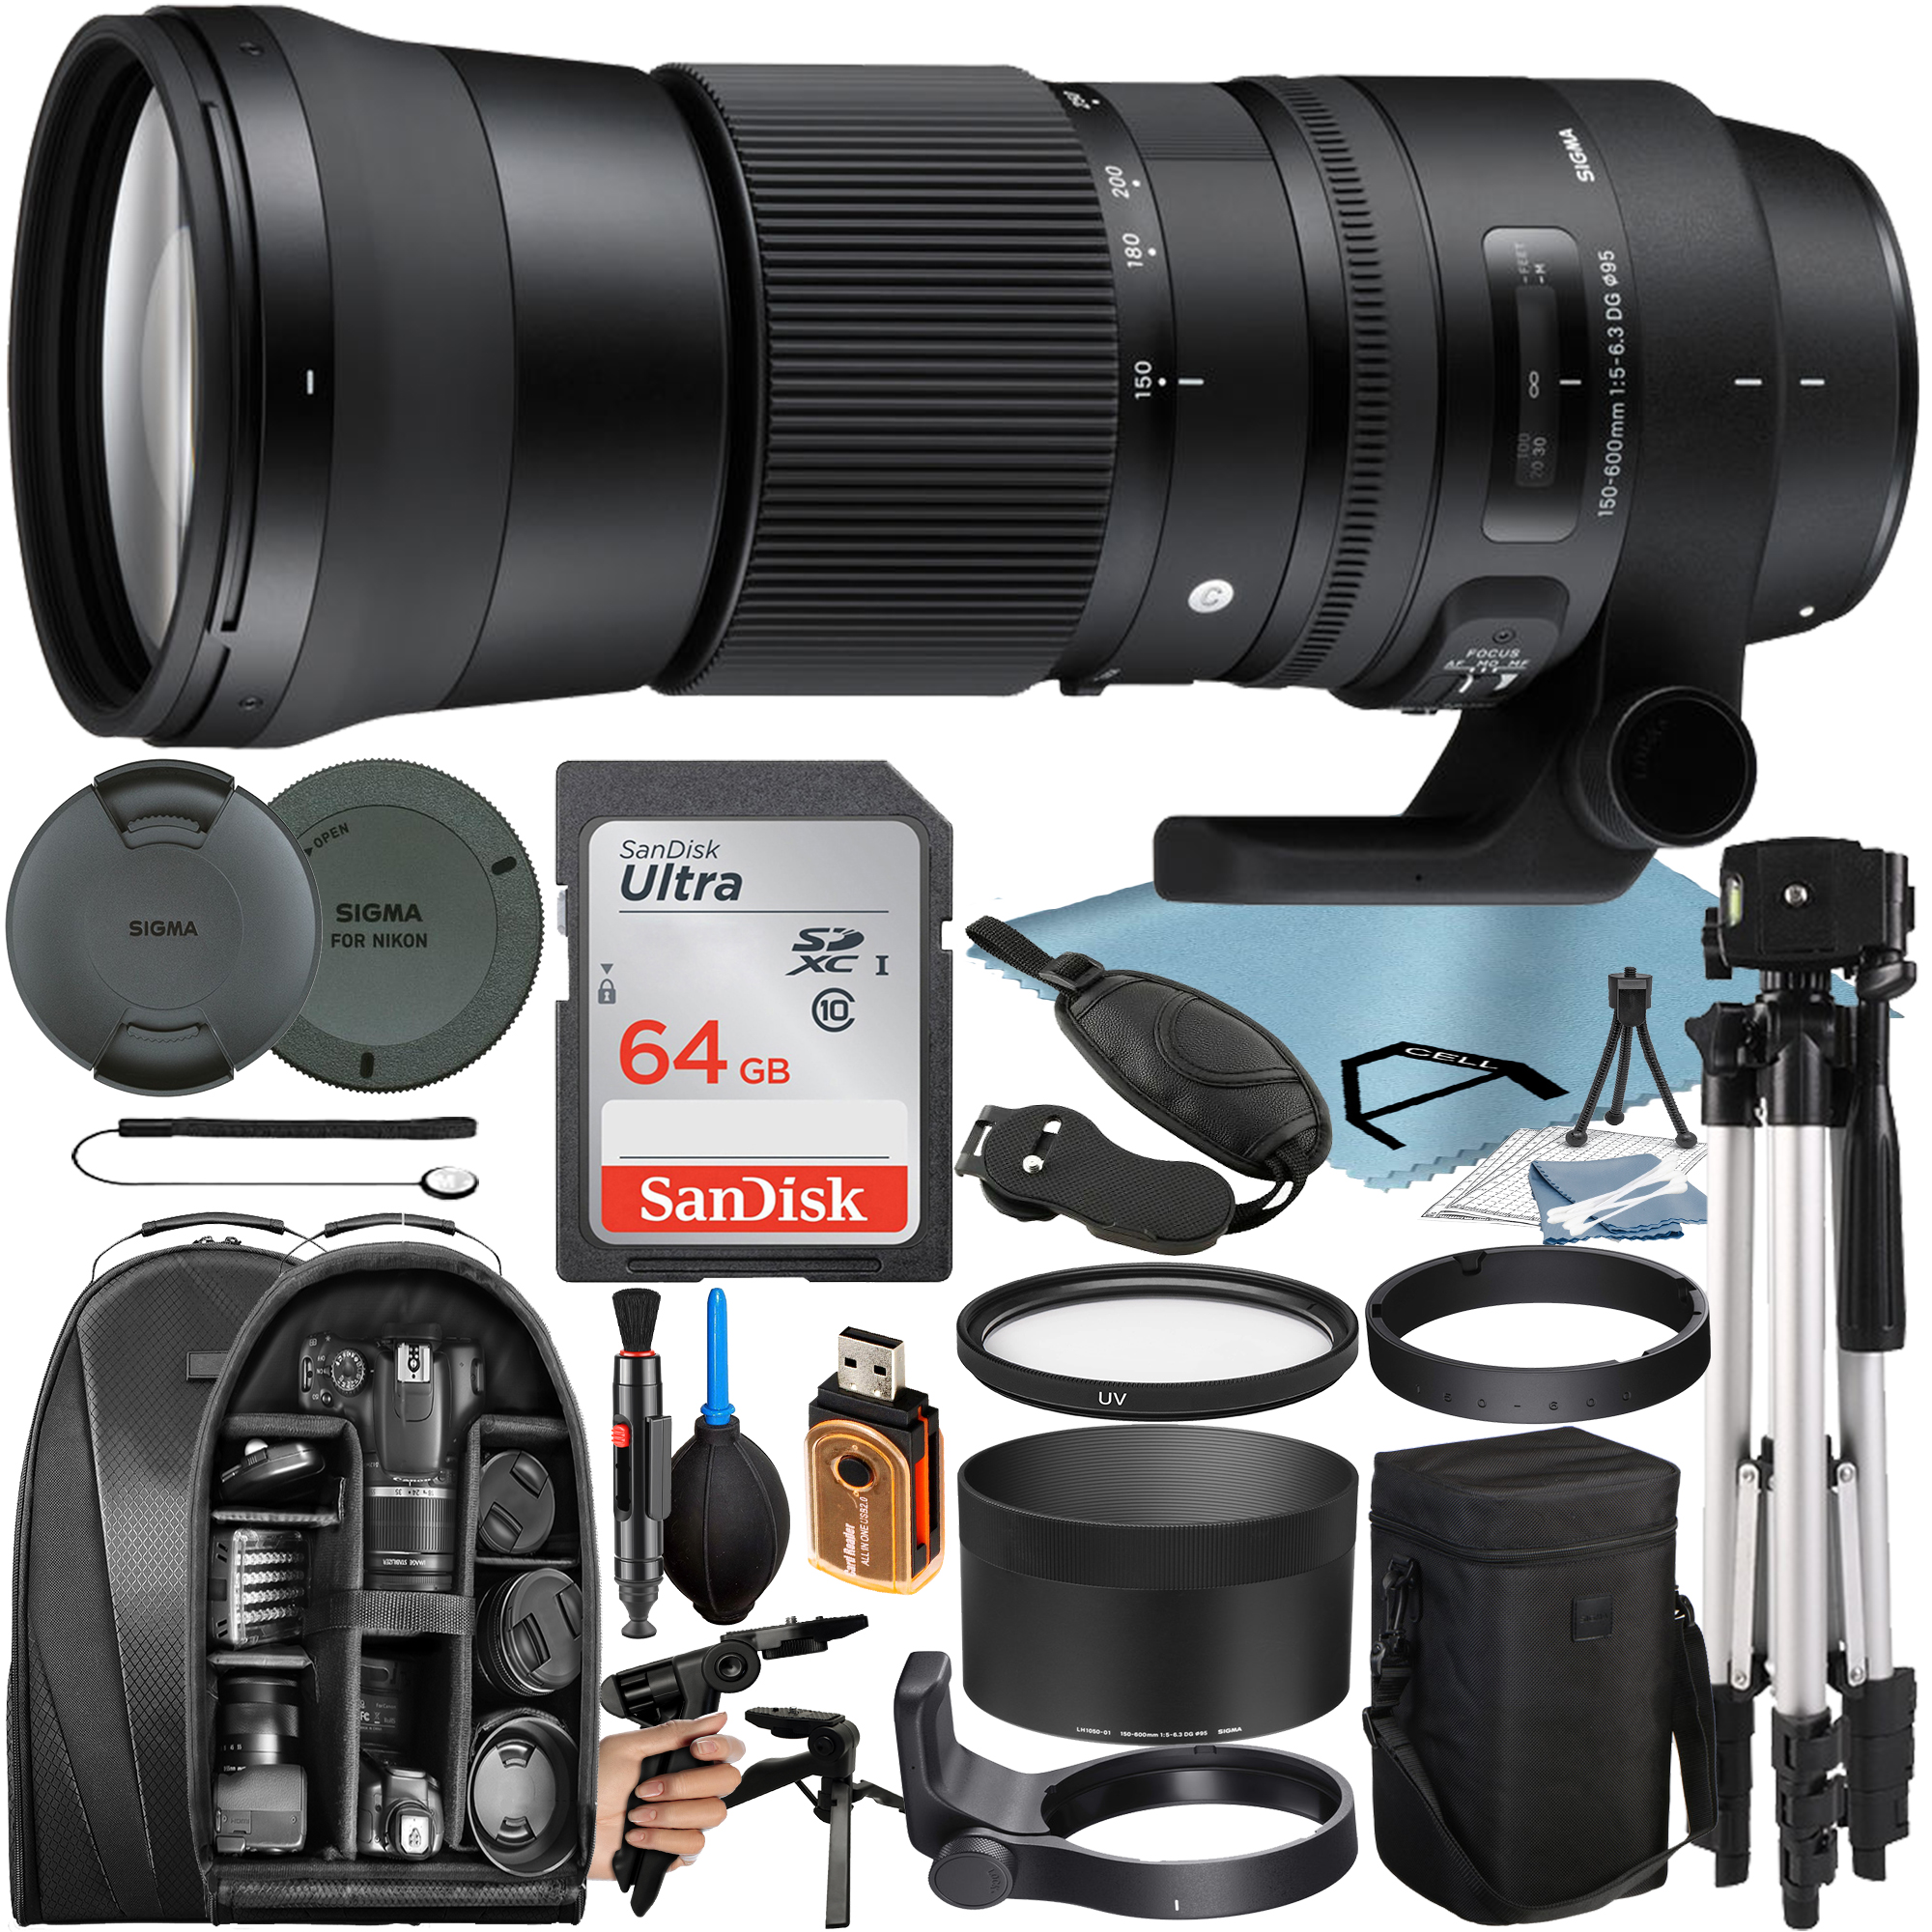 Sigma 150-600mm F/5-6.3 DG OS HSM Contemporary Lens for Nikon F with 64GB SanDisk Memory Card + Tripod + Backpack + A-Cell Accessory Bundle